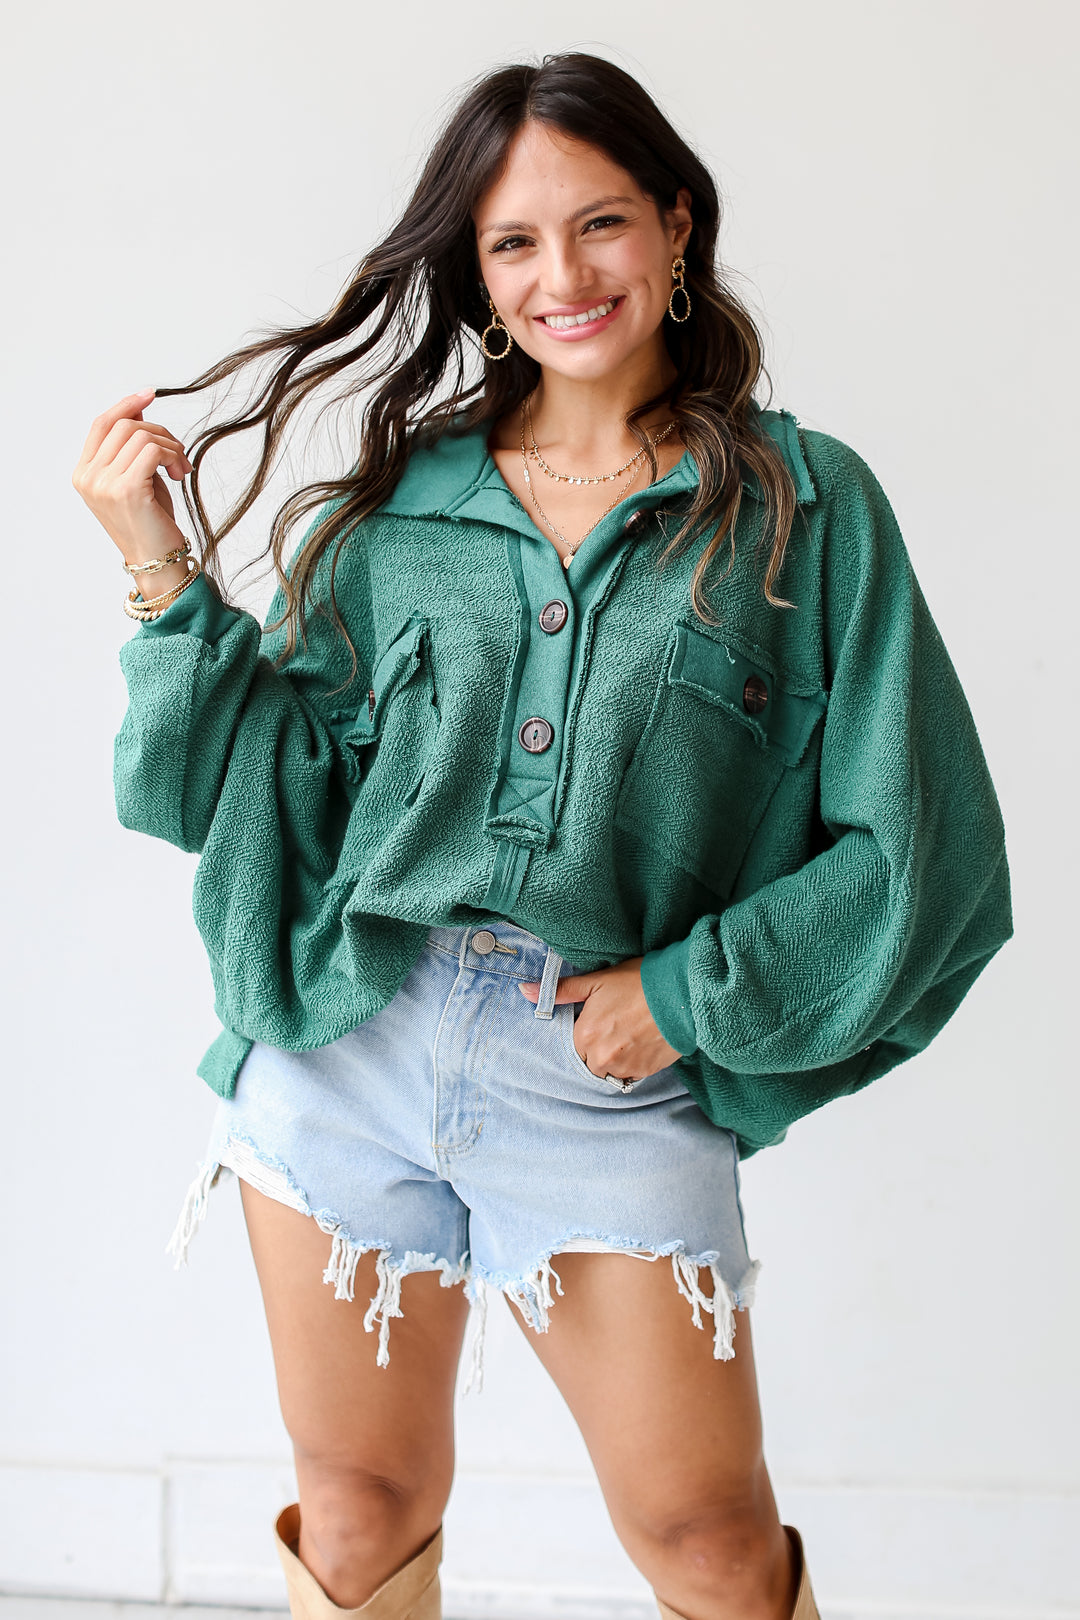 hunter green Oversized Collared Top on dress up model